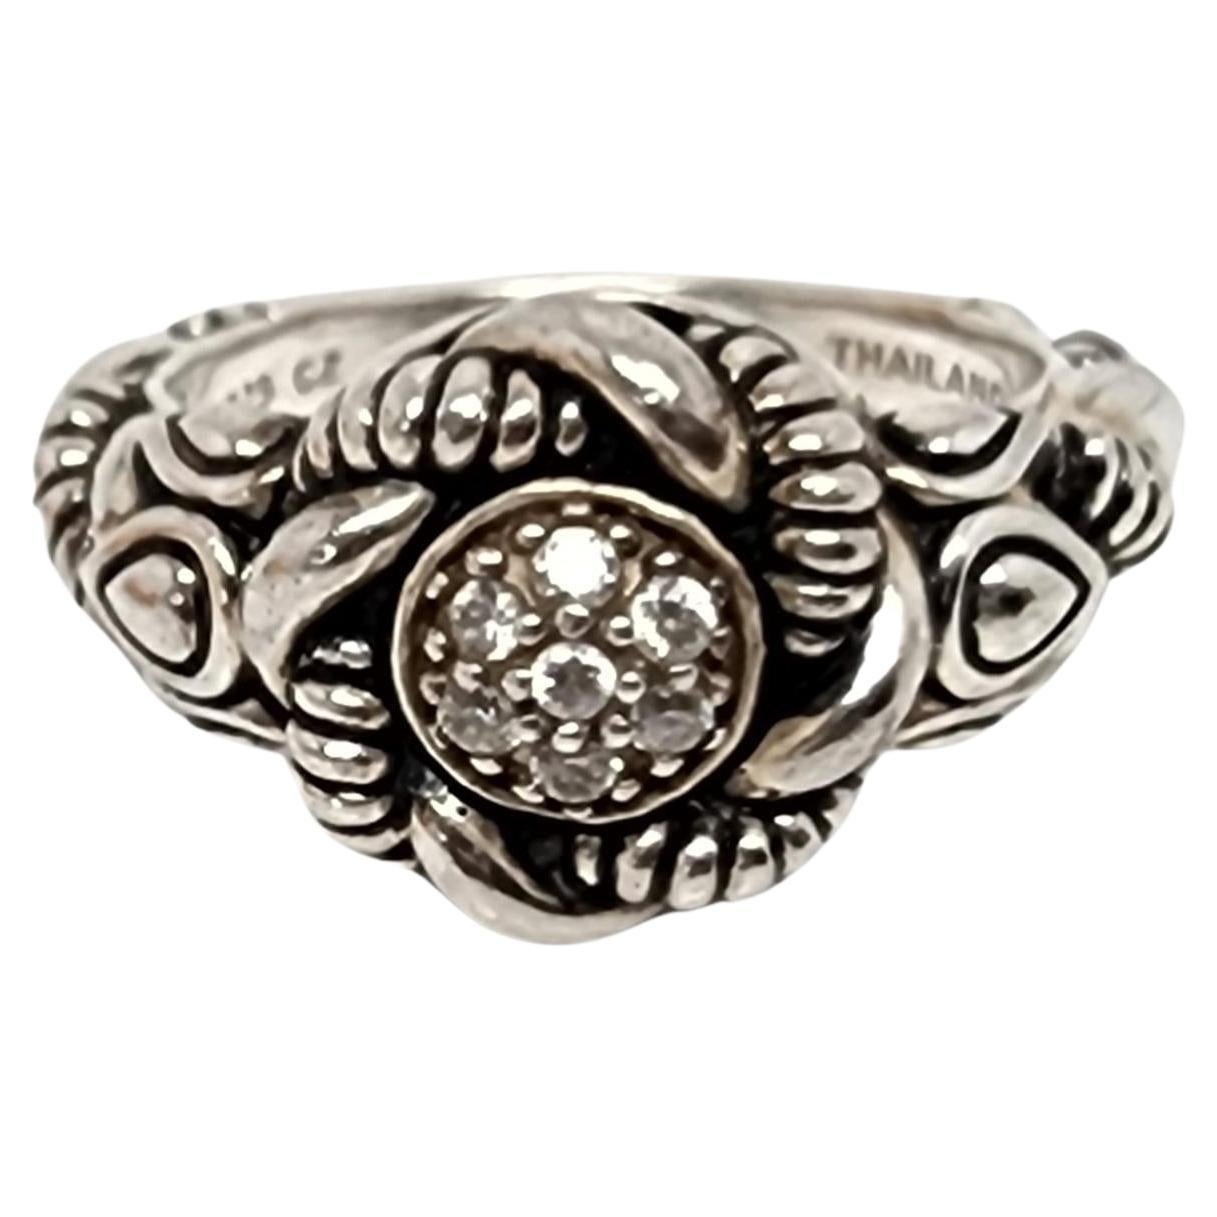 JAI by John Hardy Sterling Silver Clear CZ Ring Size 7 #15956